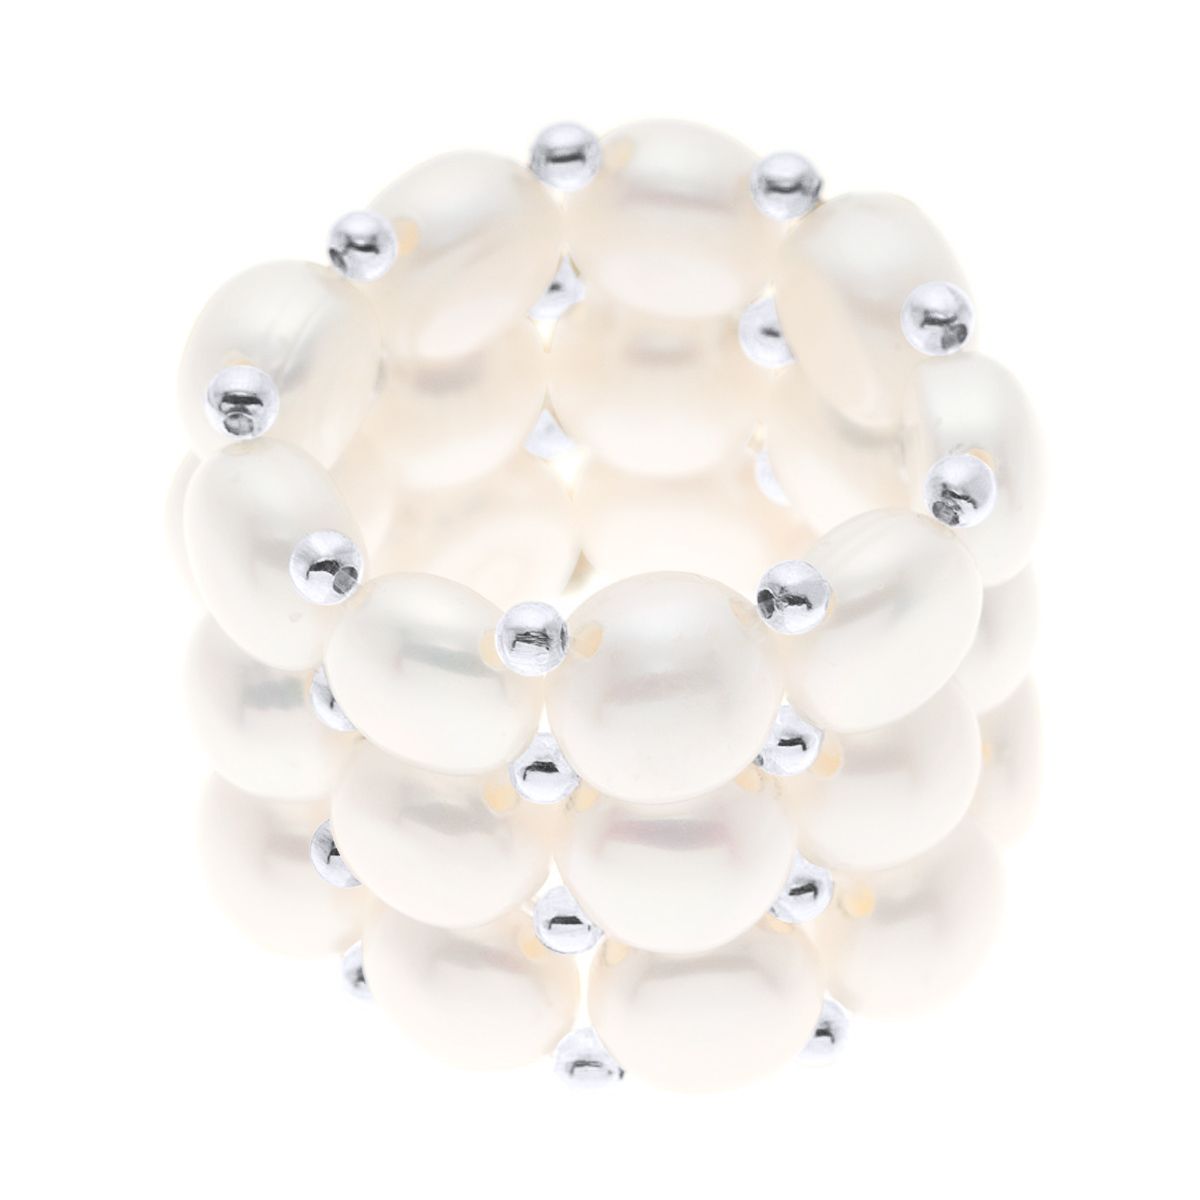 Ring of 3 true Cultured Freshwater Pearls - Natural White Color 4 mm Size adjustable - Our jewellery is made in France and will be delivered in a gift box accompanied by a Certificate of Authenticity and International Warranty